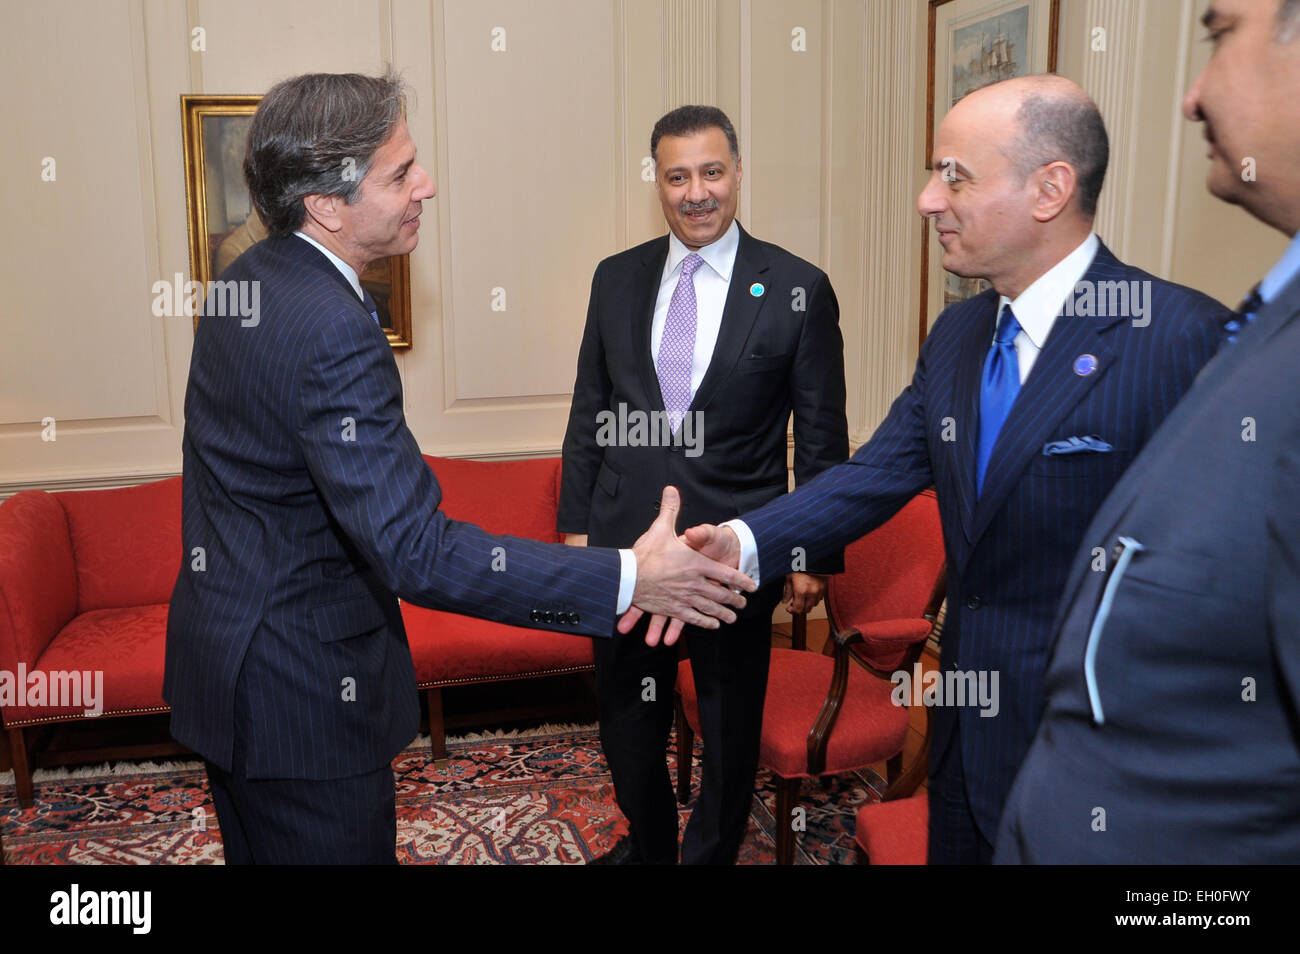 Deputy Secretary of State Antony &quot;Tony&quot; Blinken greets Saudi Ambassador to the U.S. Adel al-Jubeir before his meeting with Saudi Deputy Foreign Minister Prince Abd al-Aziz bin Abdullah Al Saud at the U.S. Department of State in Washington, D.C., on February 19, 2015. The Deputy Secretary met with the Saudi Deputy Foreign Minister on the margins of the White House Summit to Counter Violent Extremism. Stock Photo